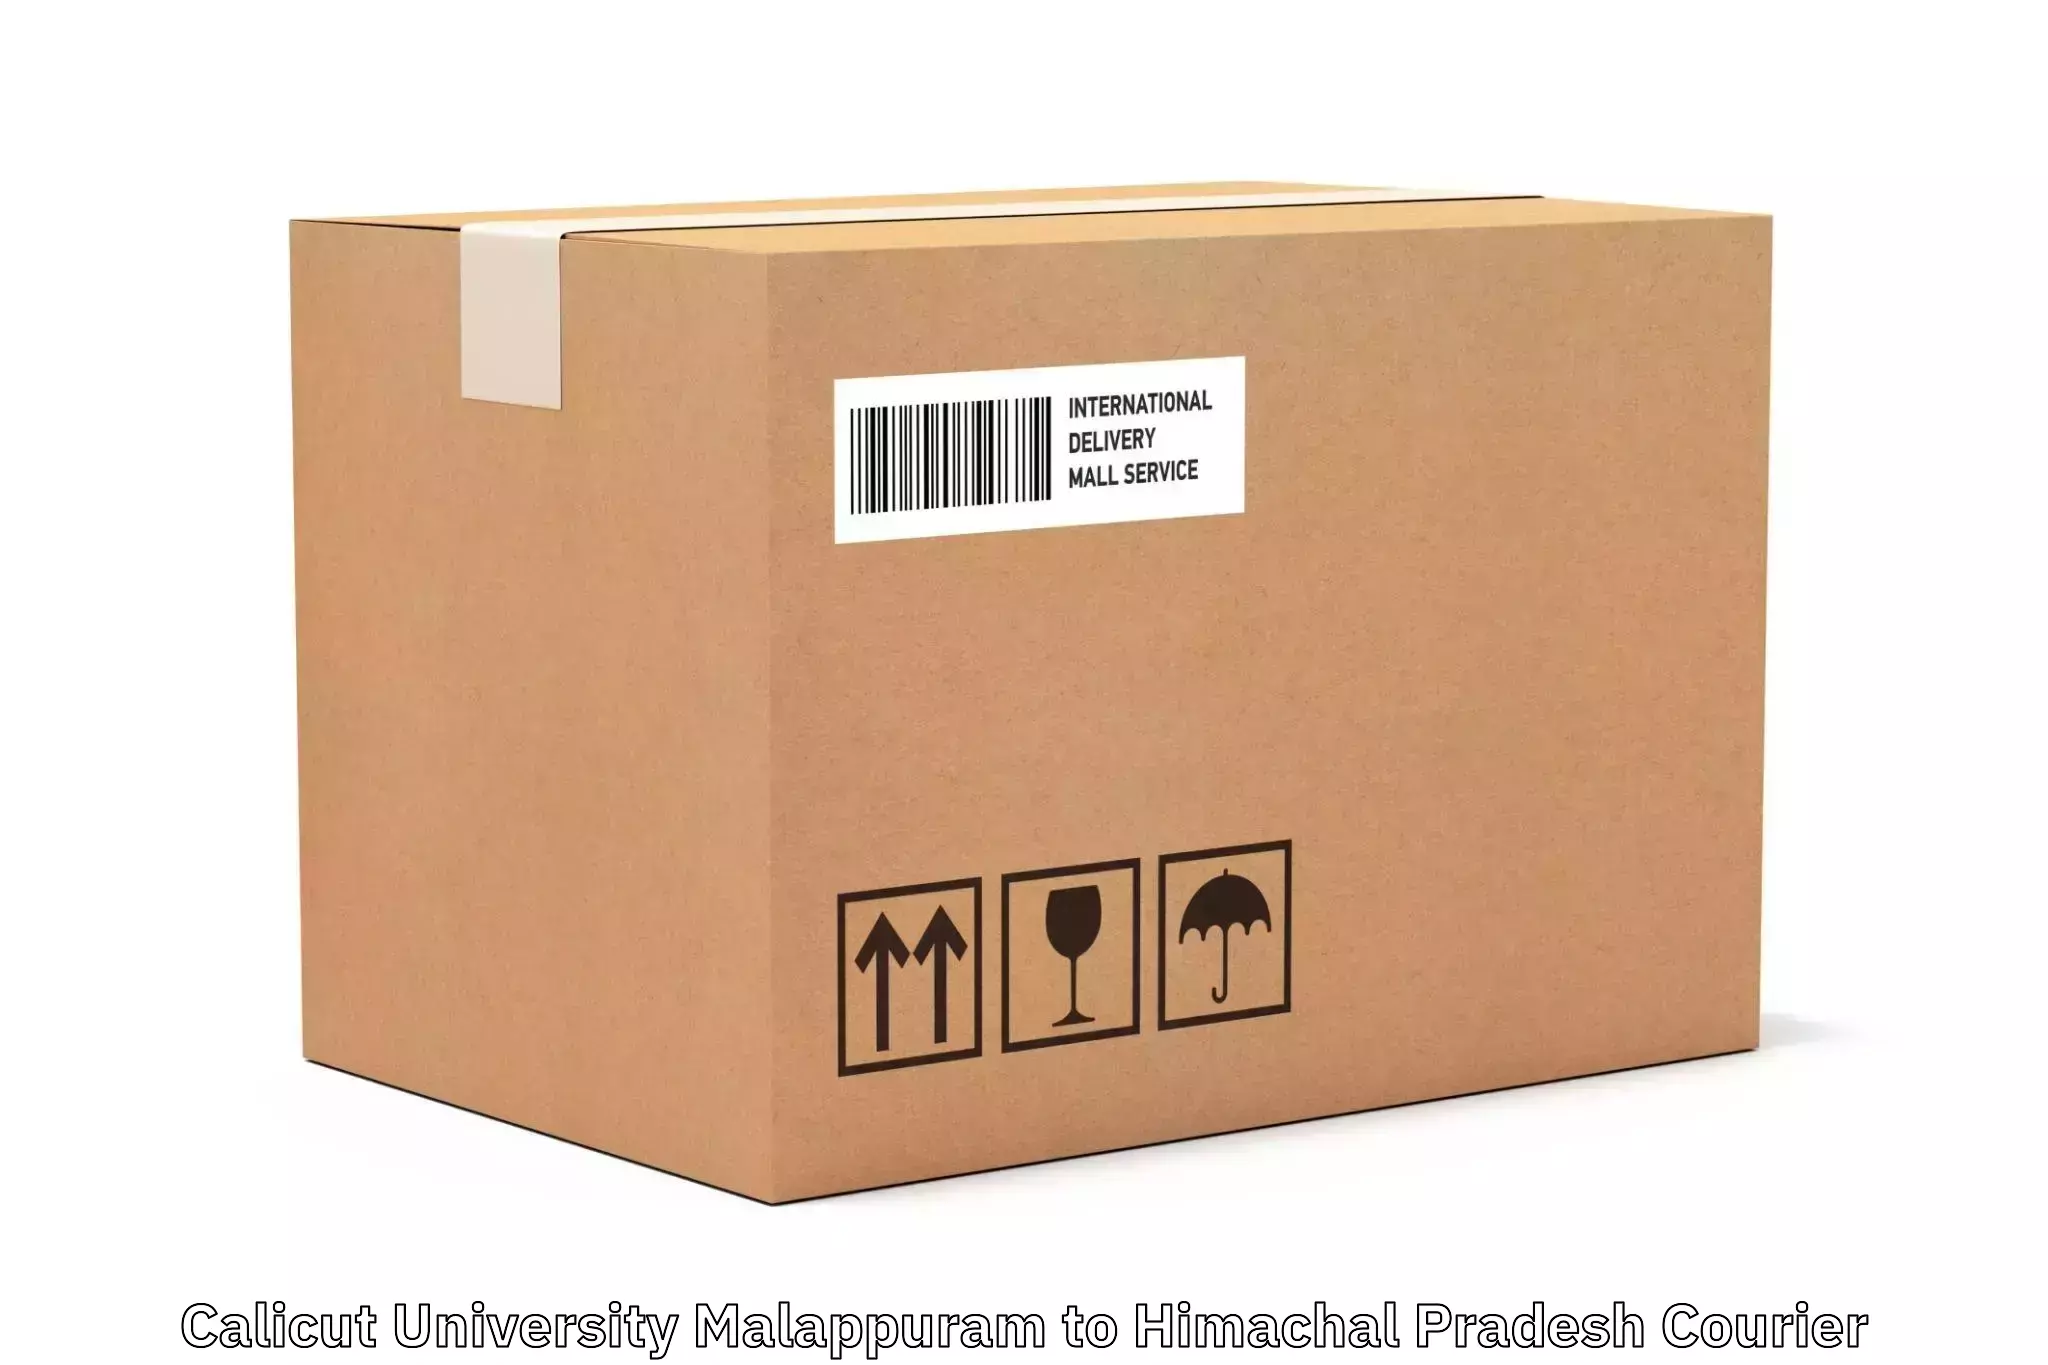 Personal parcel delivery in Calicut University Malappuram to Keylong